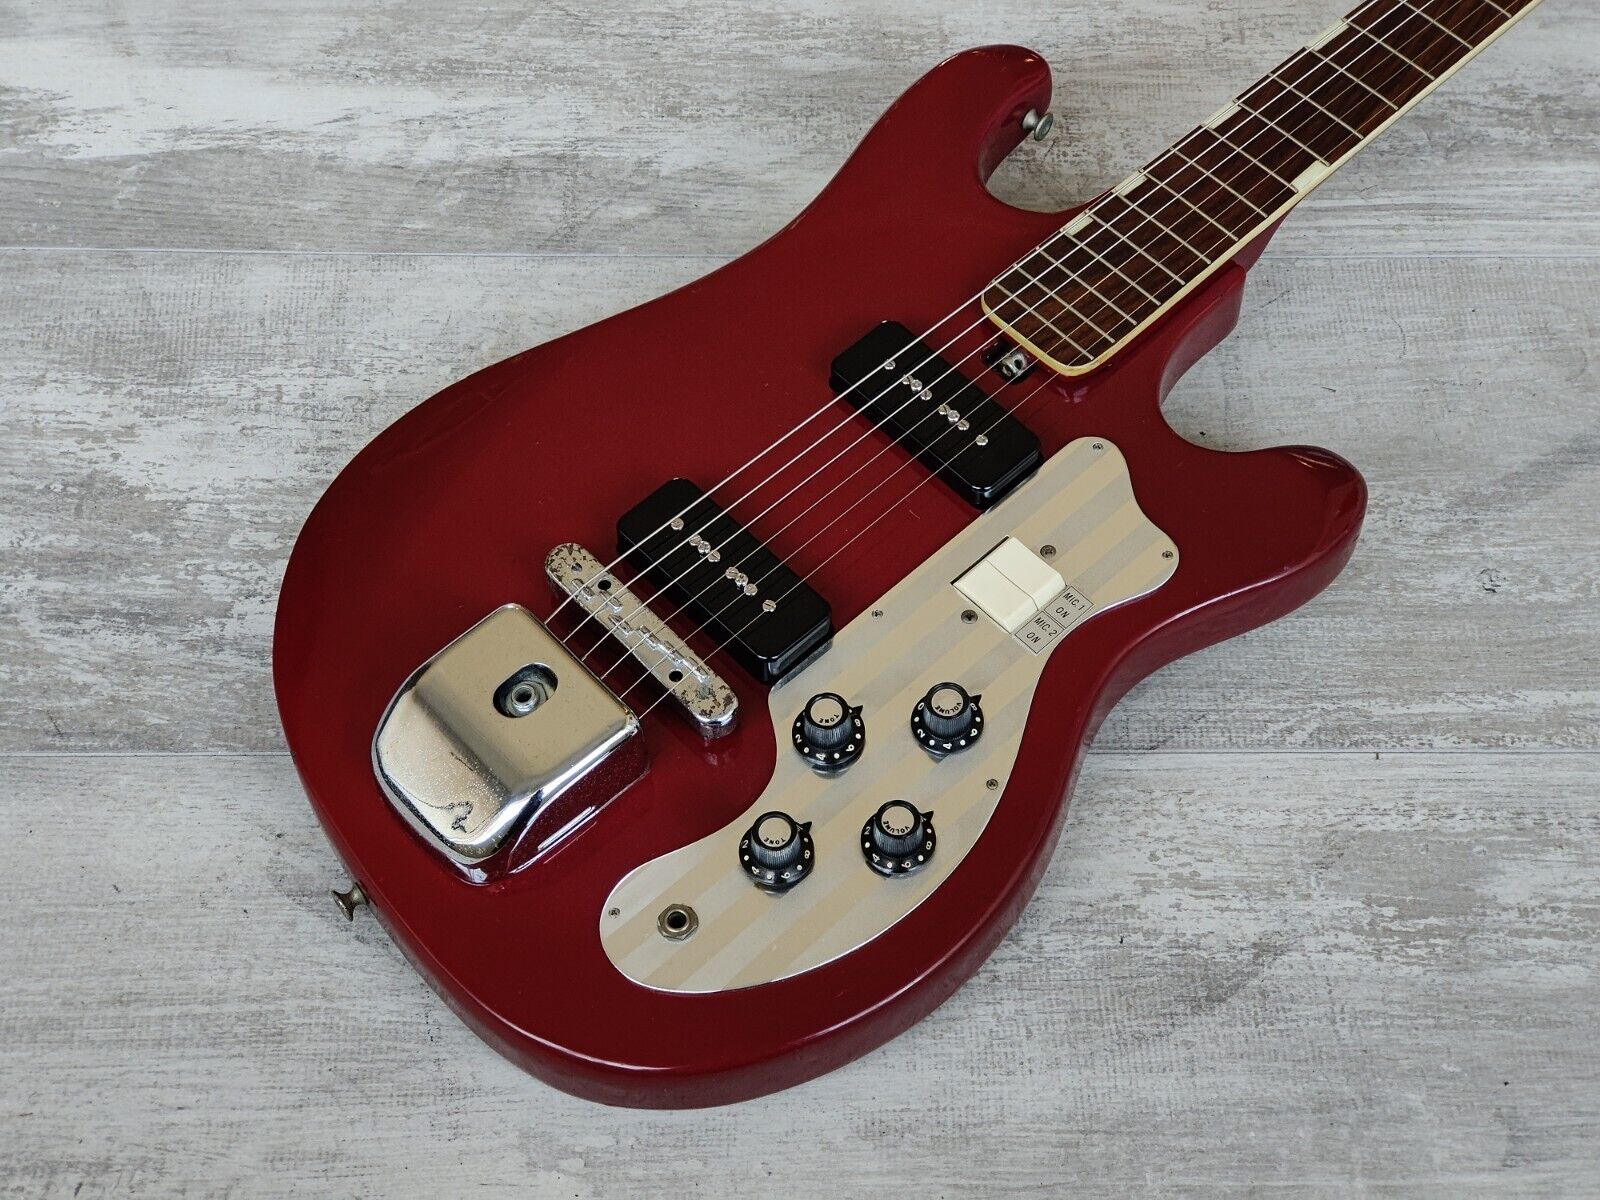 Teisco – Cool Old Guitars